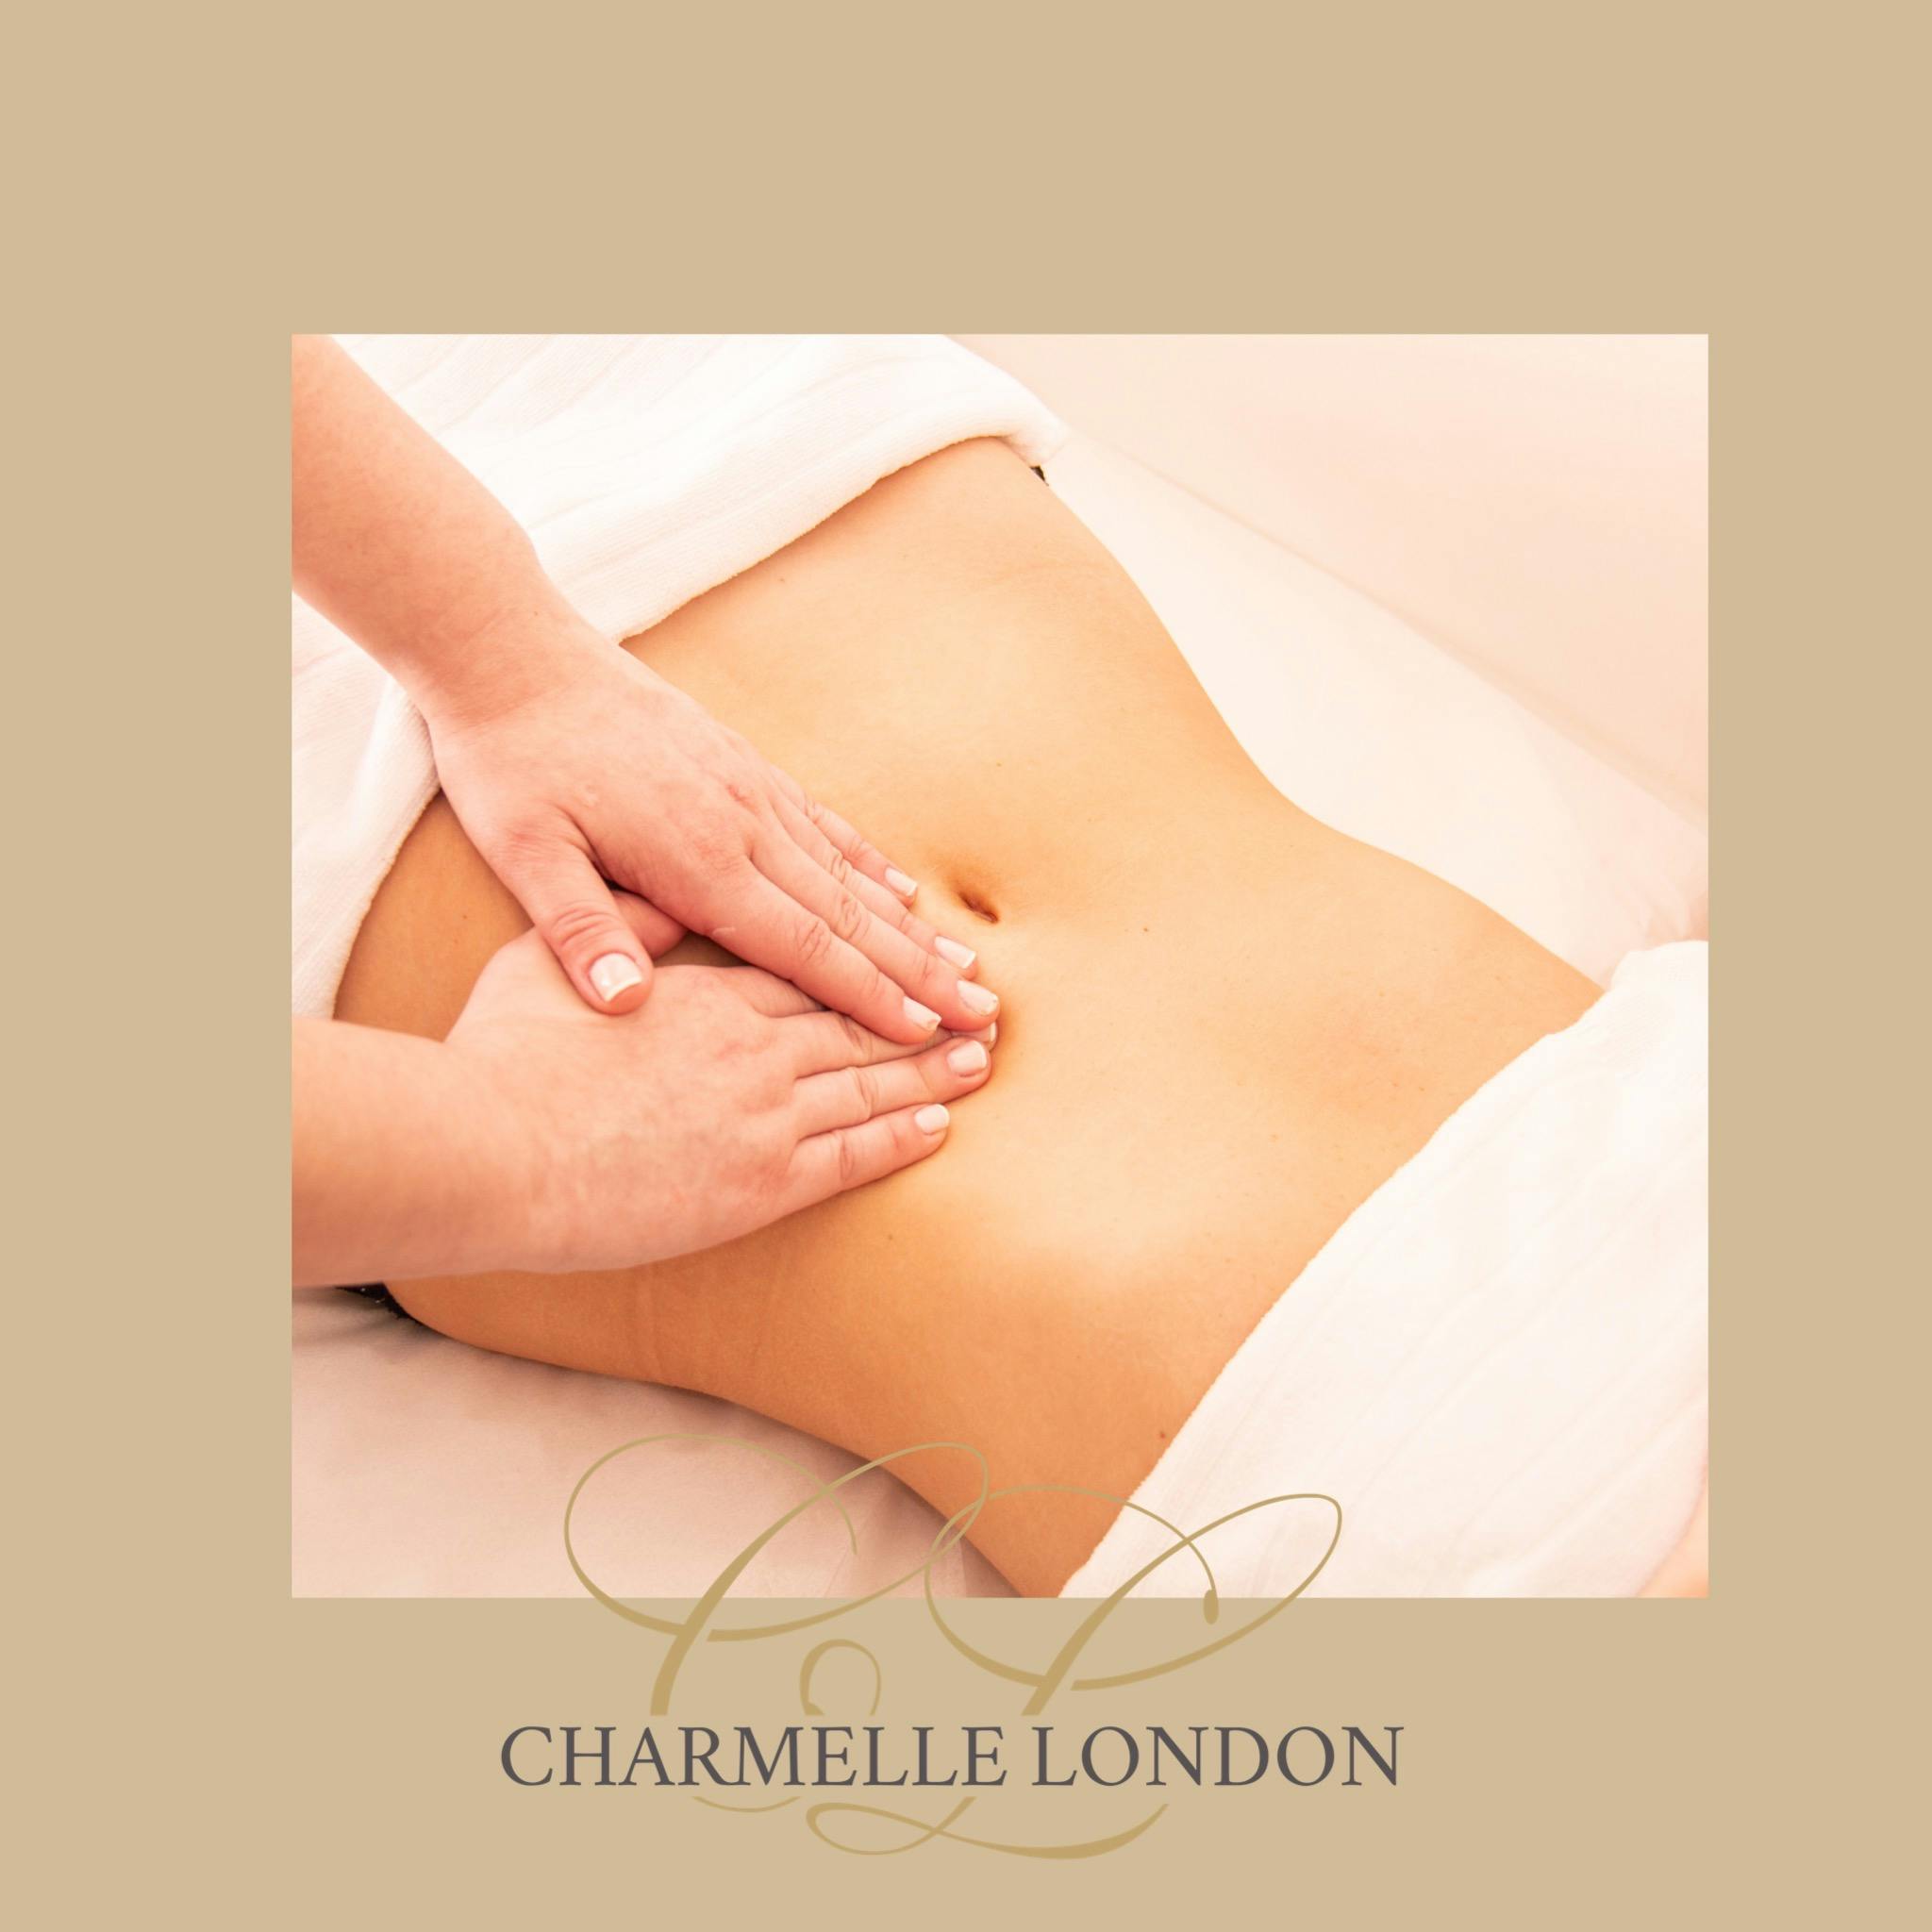 The accumulation of lymph can cause swelling, congestion and pain. Lymphatic drainage massage practitioners use gentle and precise strokes to encourage the flow of lymph.